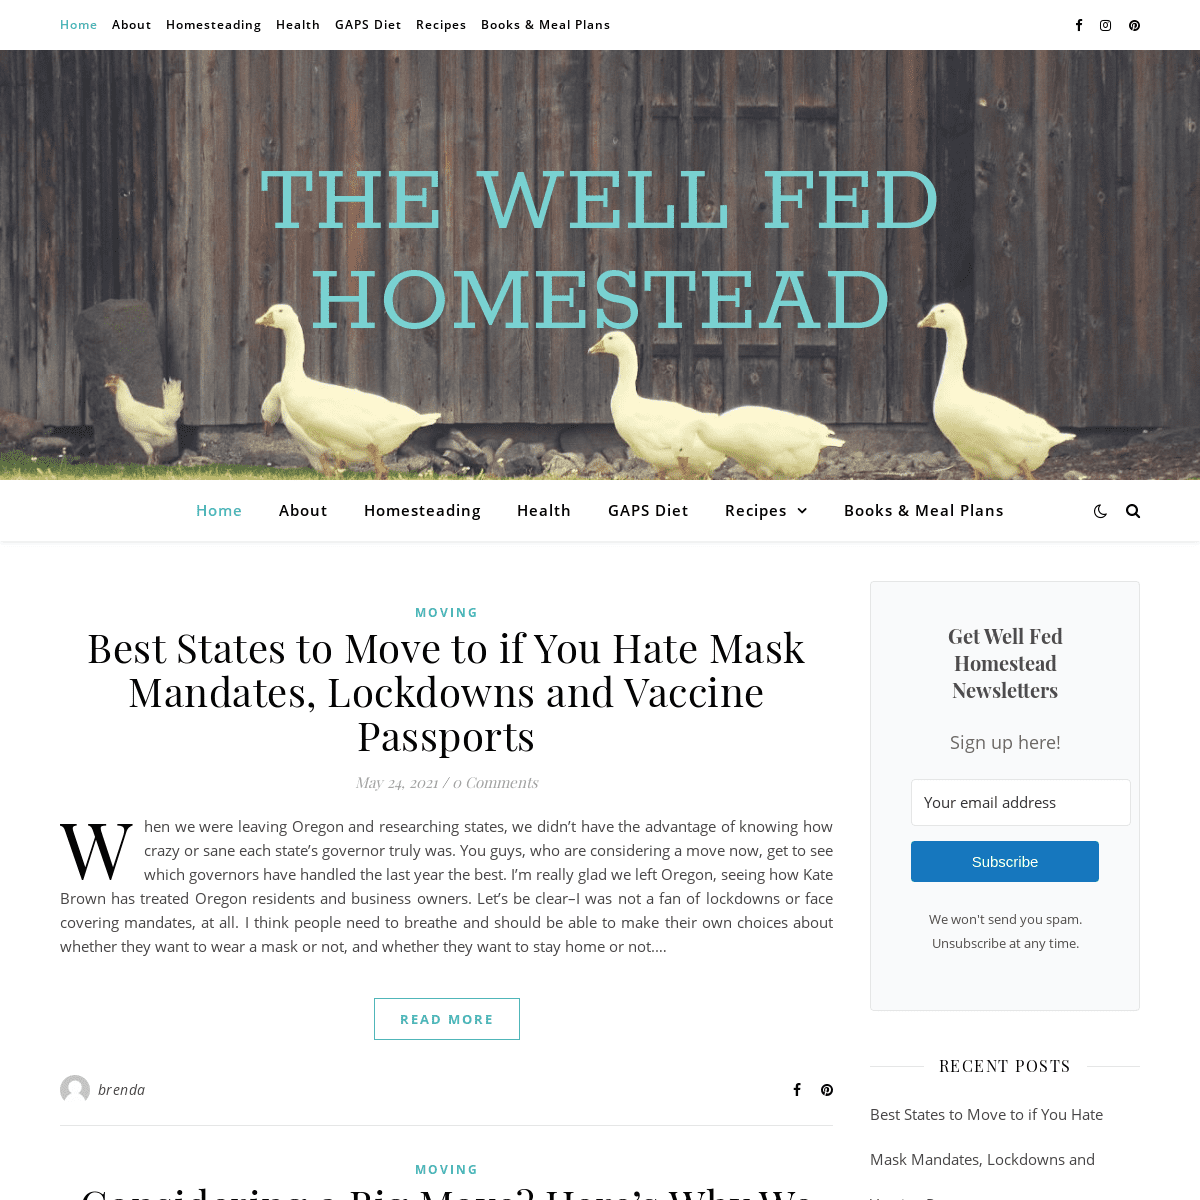 A complete backup of https://wellfedhomestead.com